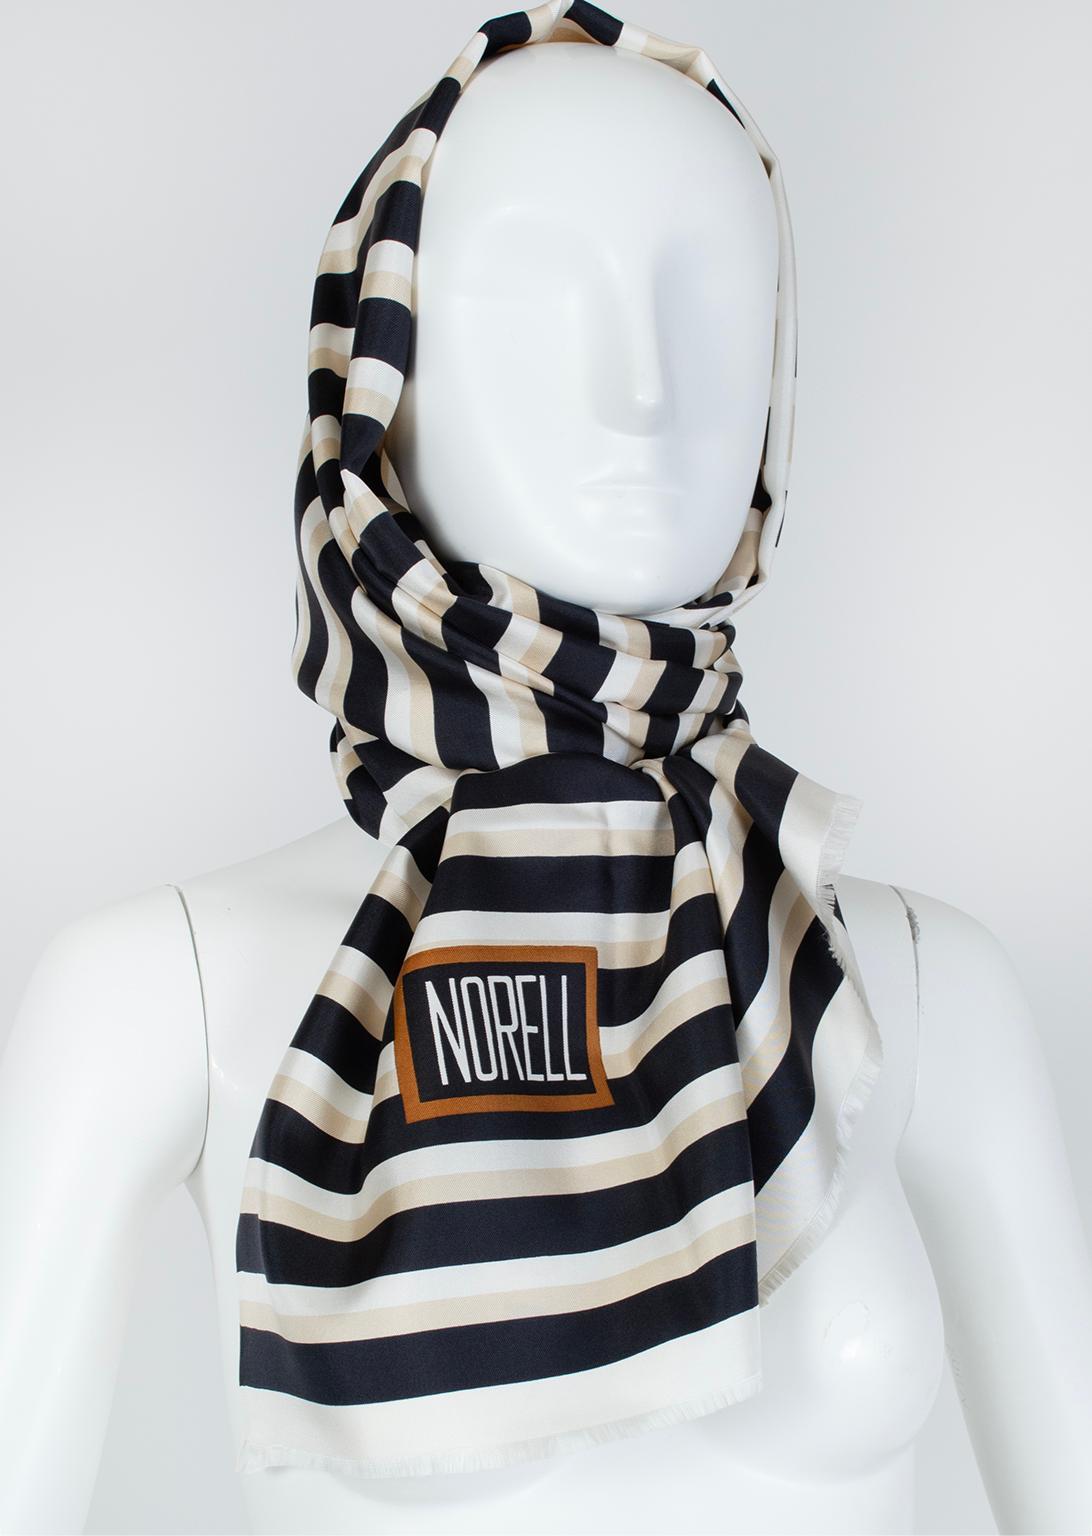 Norell Oversize Graphic Black Ivory Taupe Stripe Silk Scarf – 72” x 36”, 1960s In Excellent Condition For Sale In Tucson, AZ